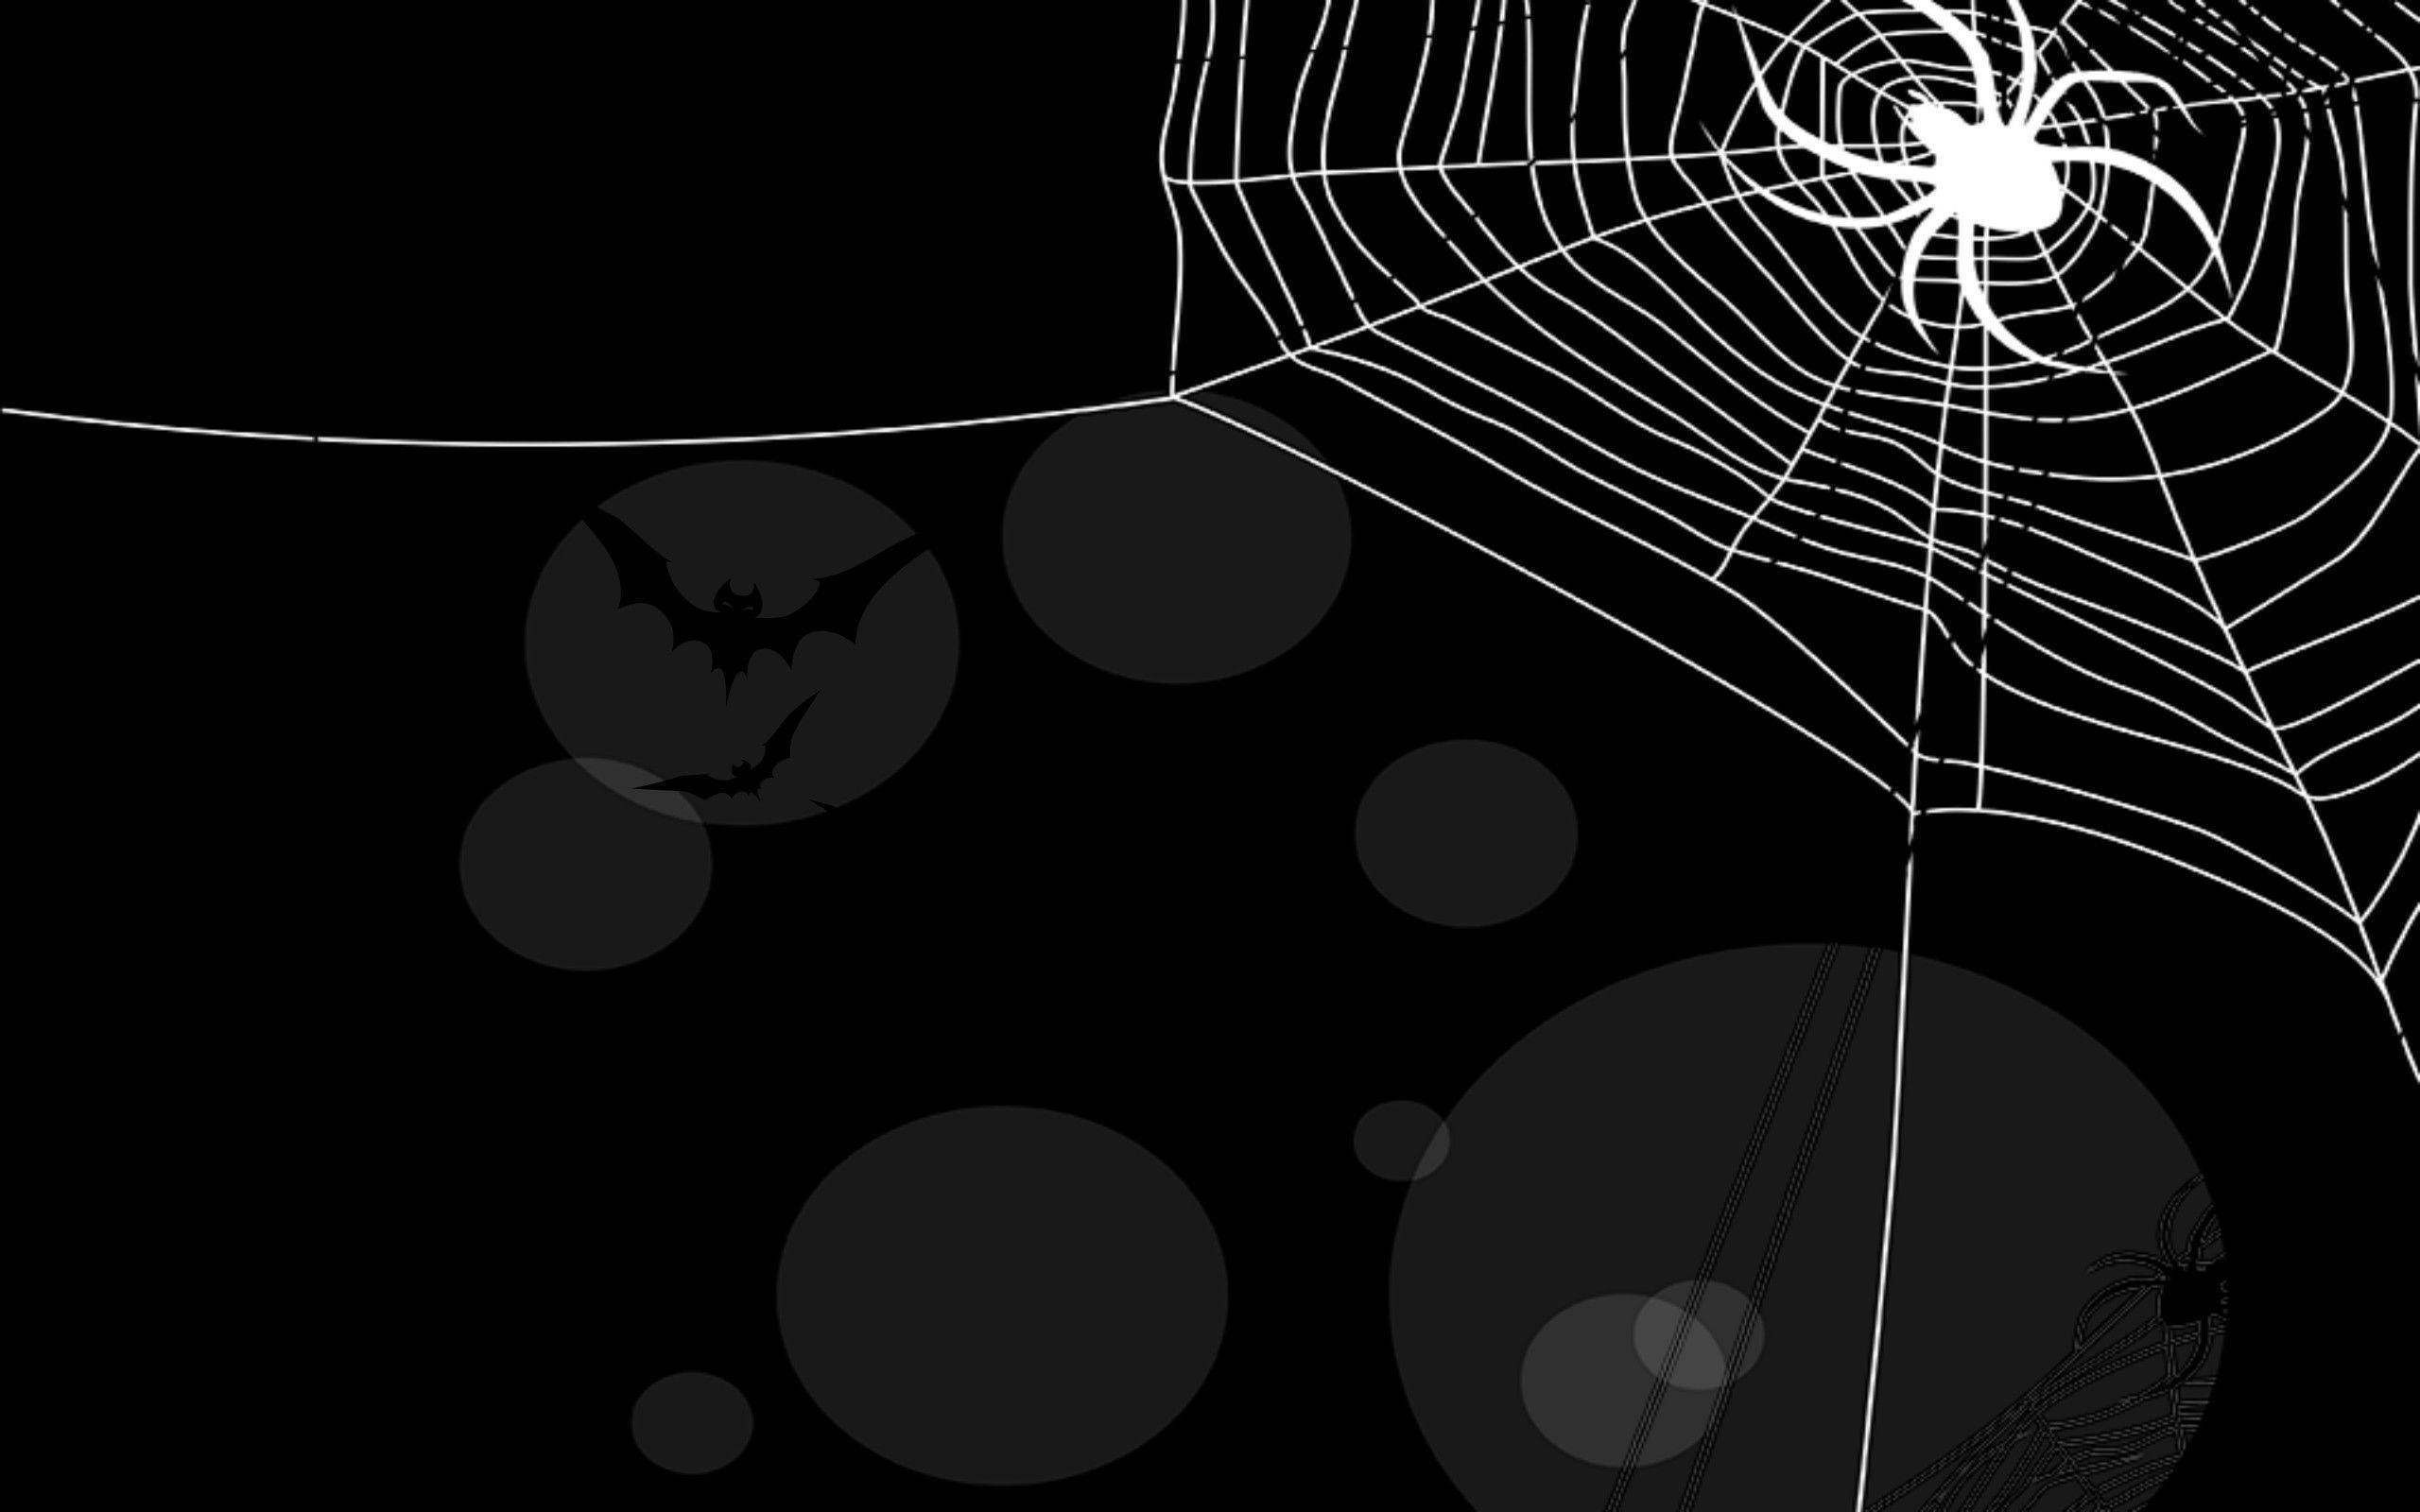 2560x1600, Wallpapers For > Spider Web Halloween Wallpaper - Black Red Spider Web Background , HD Wallpaper & Backgrounds